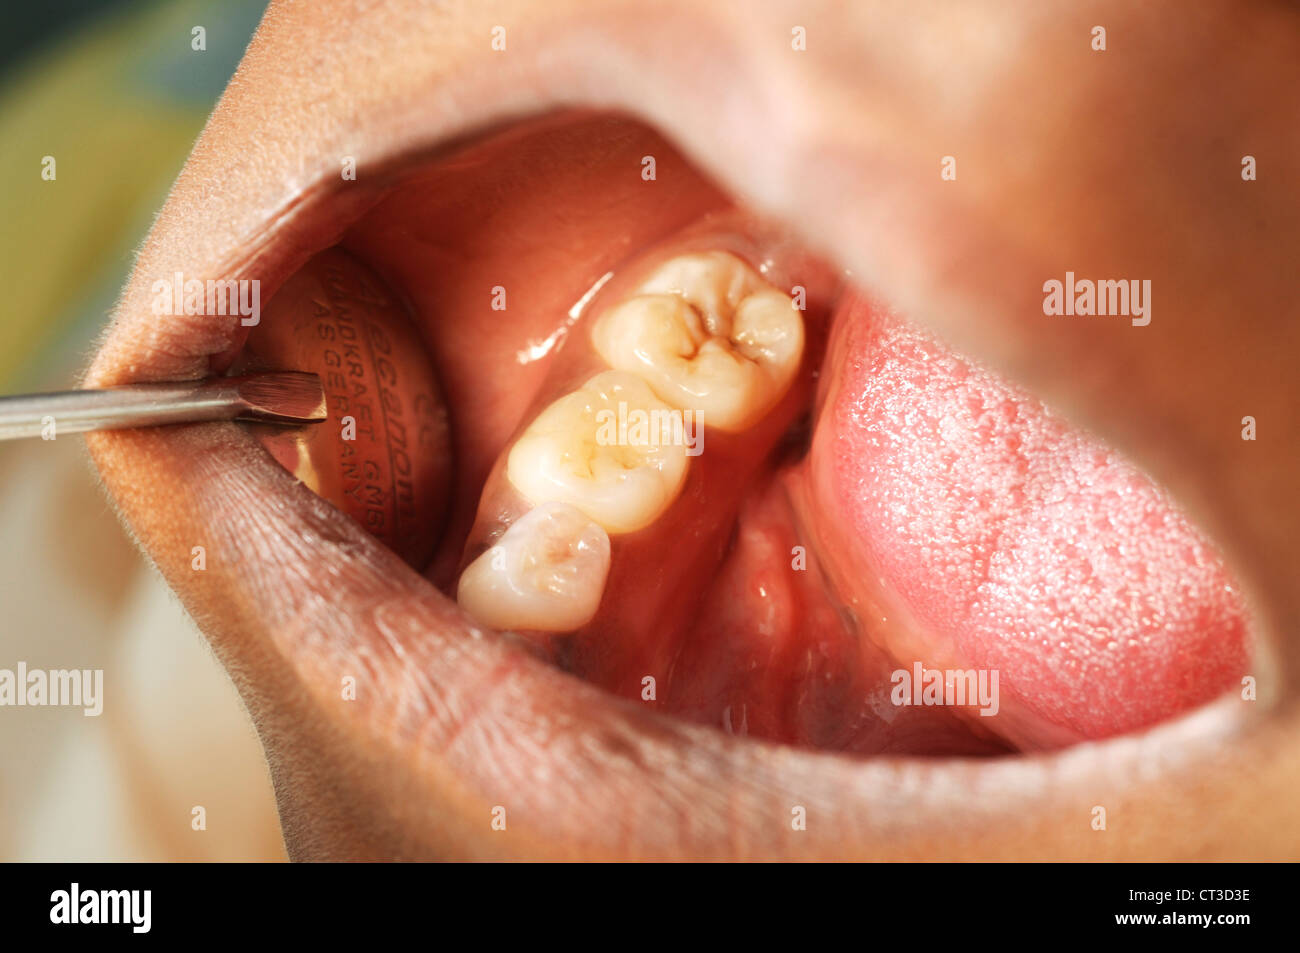 A dentist checking the teeth of a young female patient, showing slight decay. Stock Photo